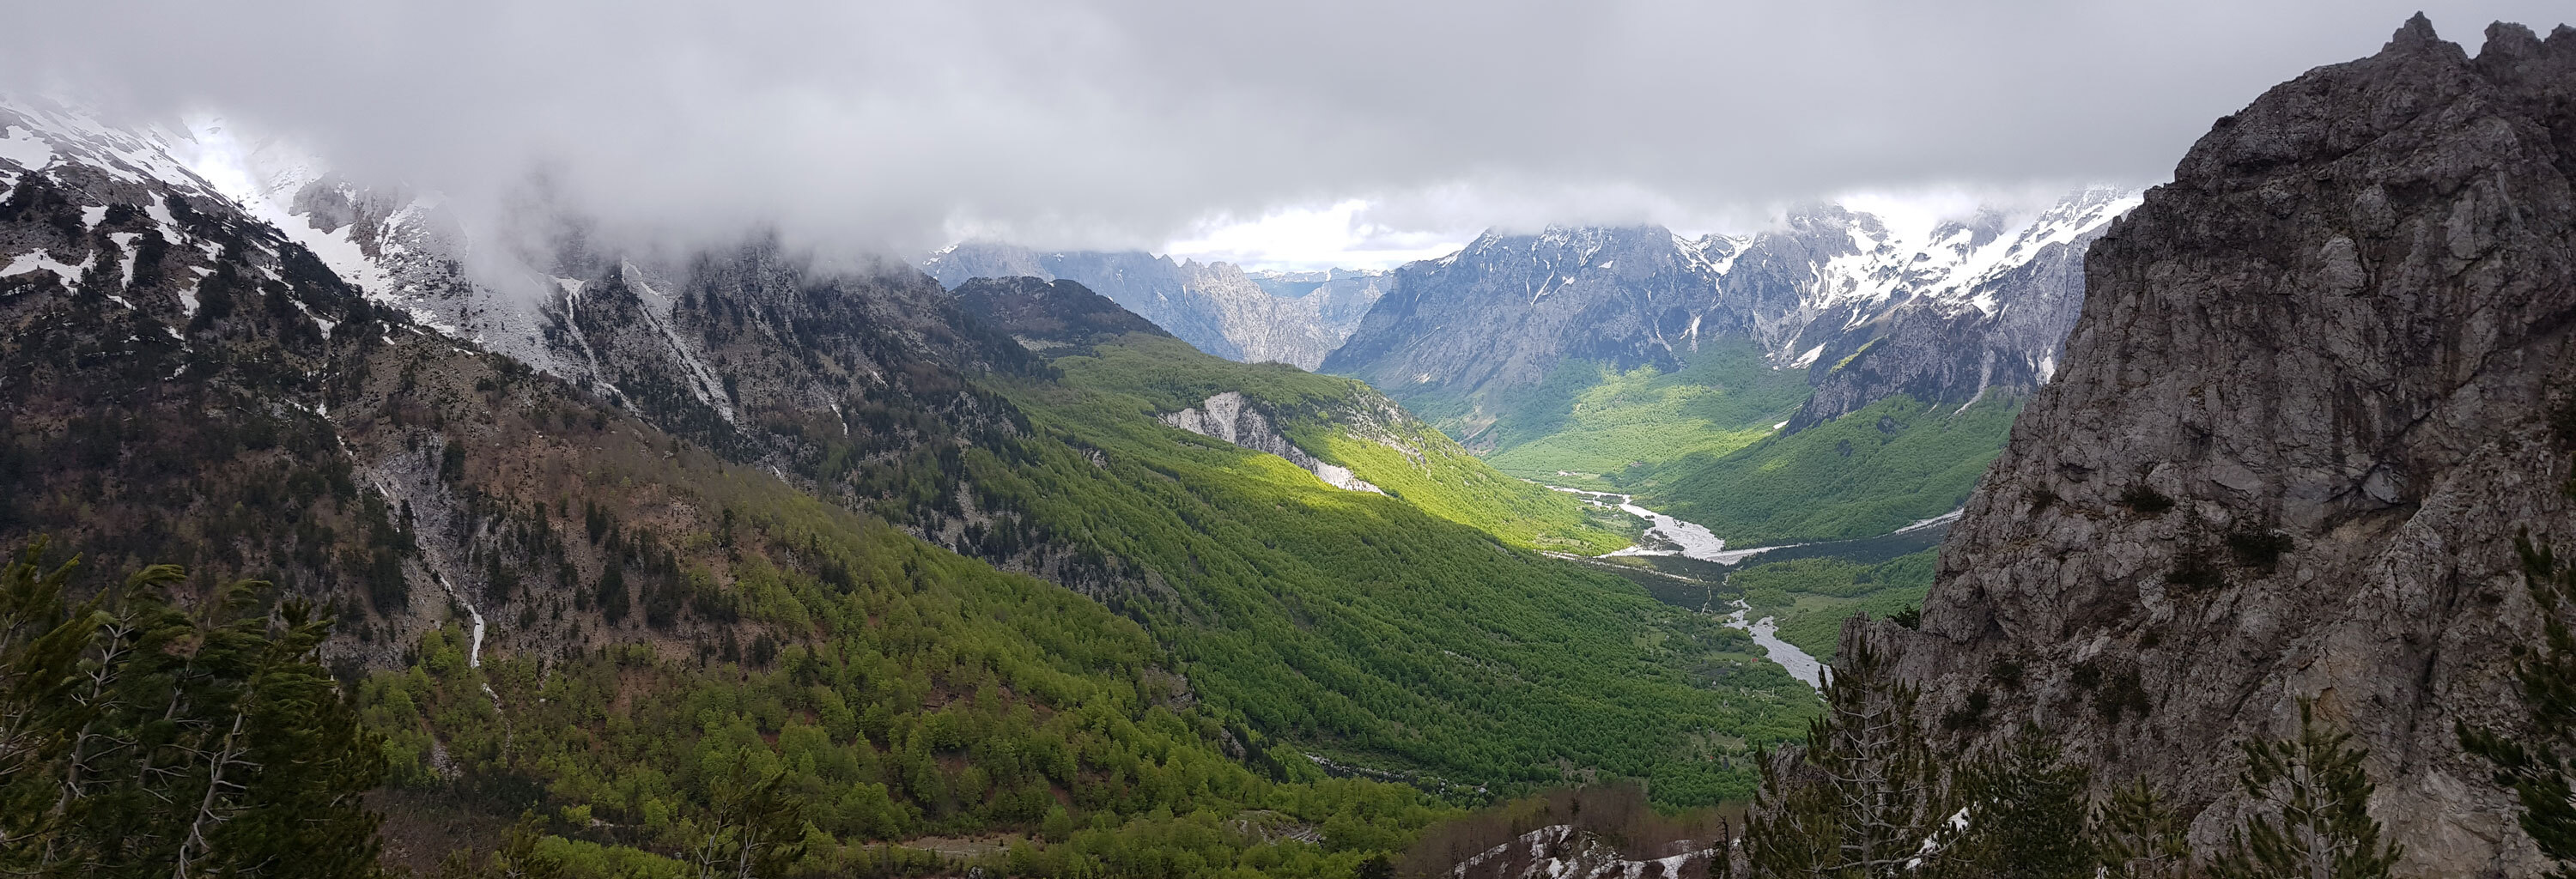 The Valbona valley from the top of the pass